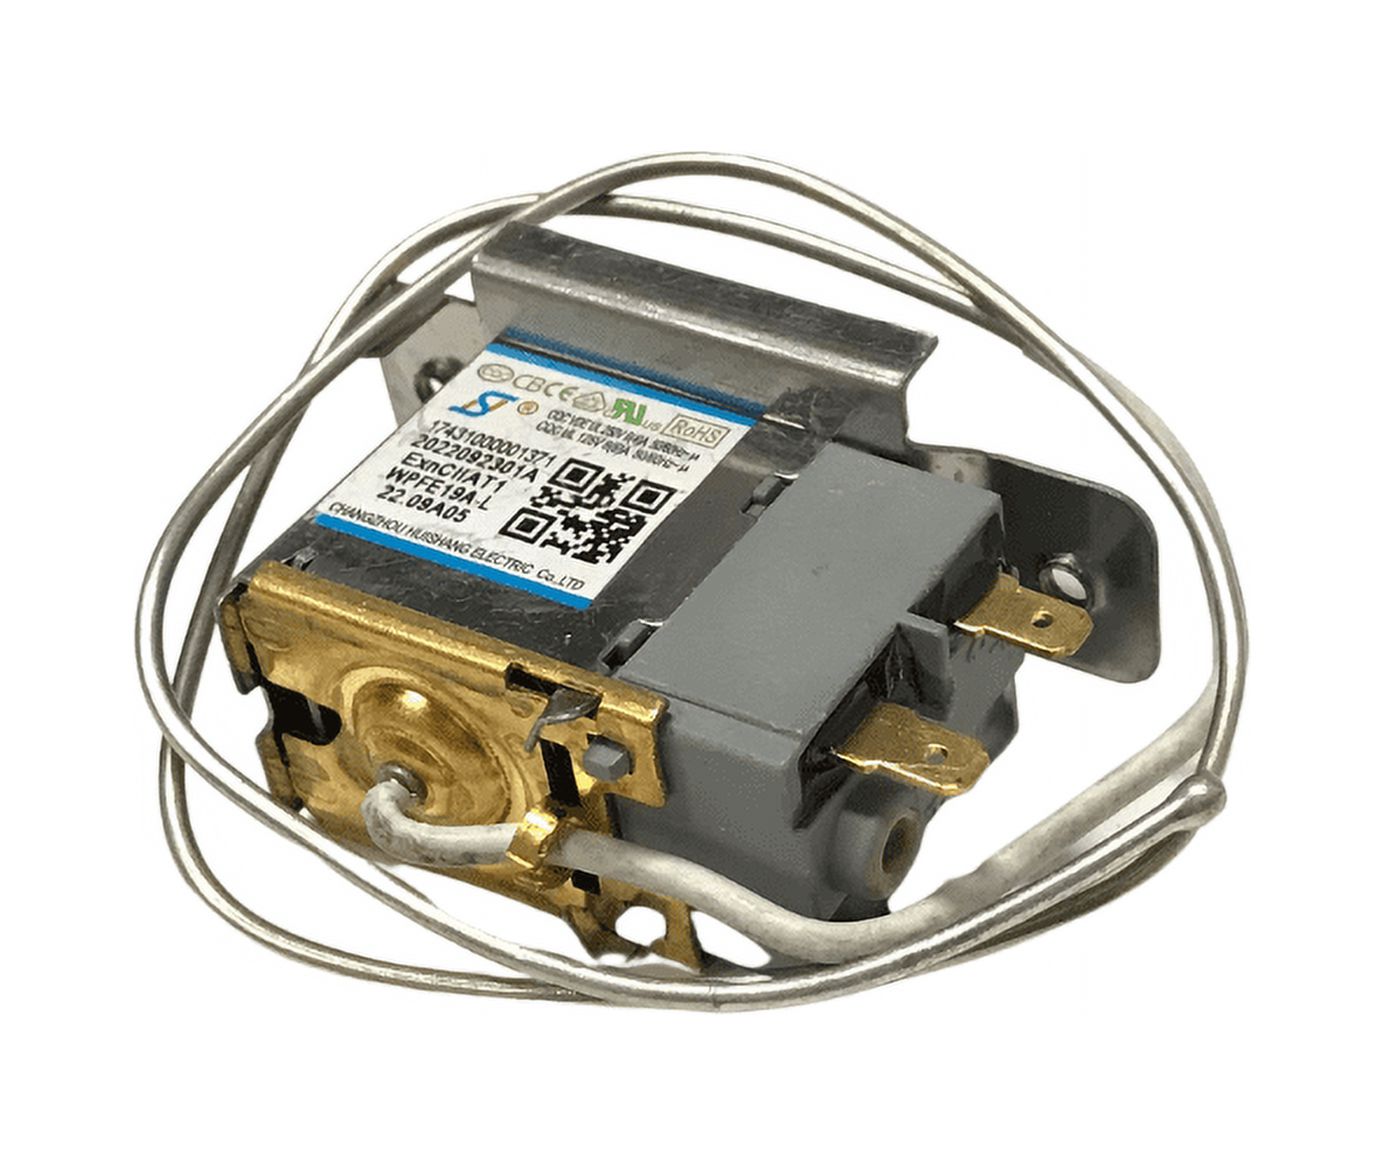 OEM Midea Refrigerator Thermostat Originally Shipped with Whs160rss1, Whs160rss1fb, Whs160rw1fb